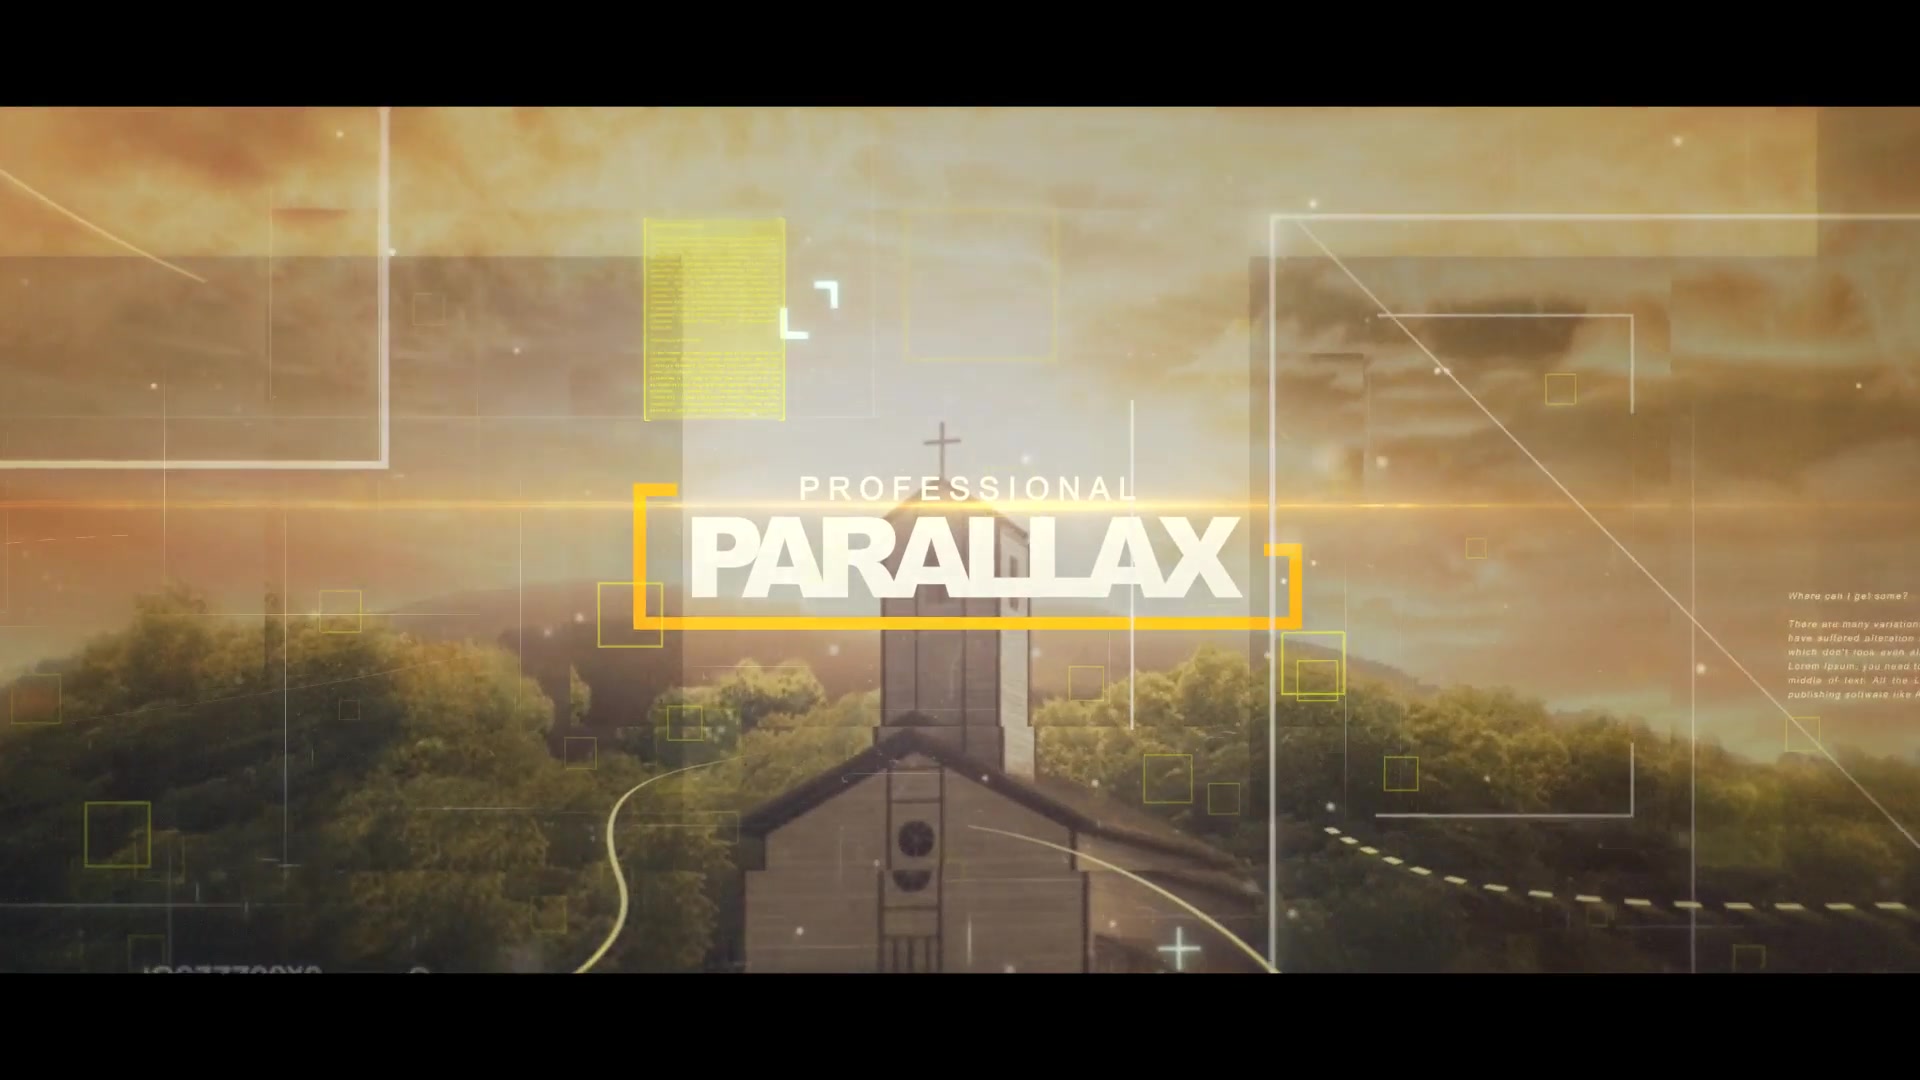 Clean Parallax Cinematic Slideshow - Download Videohive 19847628